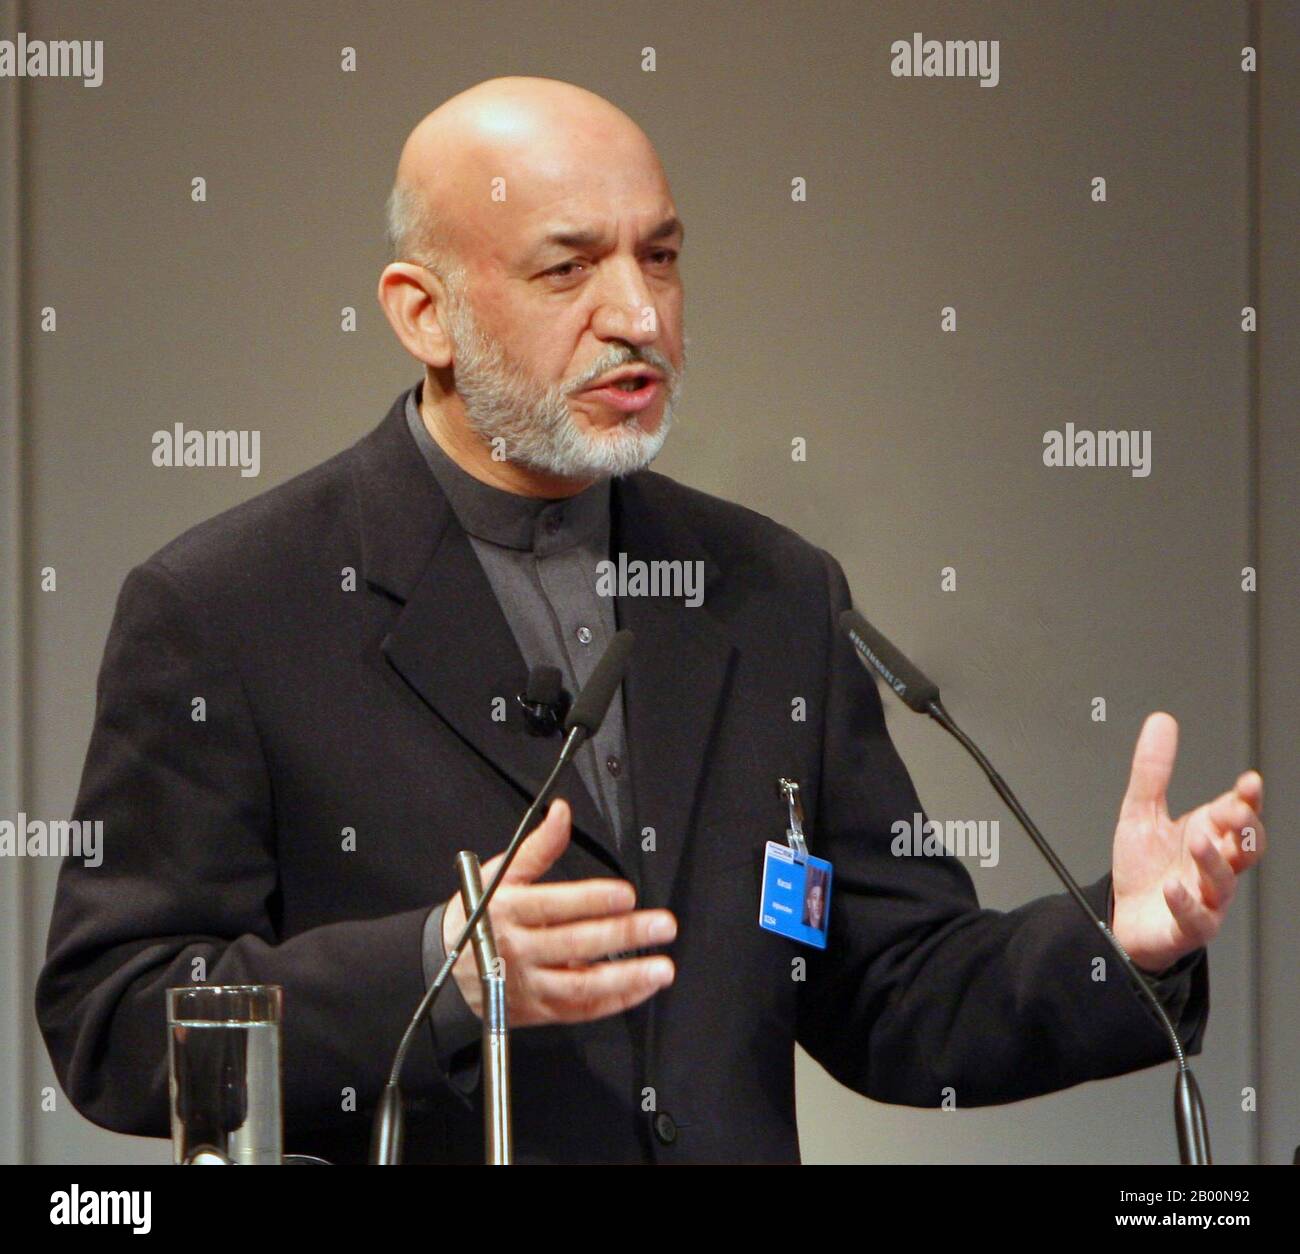 Afghanistan: Afghan President Hamid Karzai at the 45th Munich Security Conference in 2009. Photo by Harald Dettenborn (CC BY 3.0 DE License).  Hamid Karzai (24 December 1957 - ) is the 12th President of Afghanistan, taking office on 7 December 2004. He became a dominant political figure after the removal of the Taliban regime in late 2001.  During the December 2001 International Conference on Afghanistan in Germany, Karzai was selected by prominent Afghan political figures to serve a six-month term as chairman of the Interim administration. Stock Photo